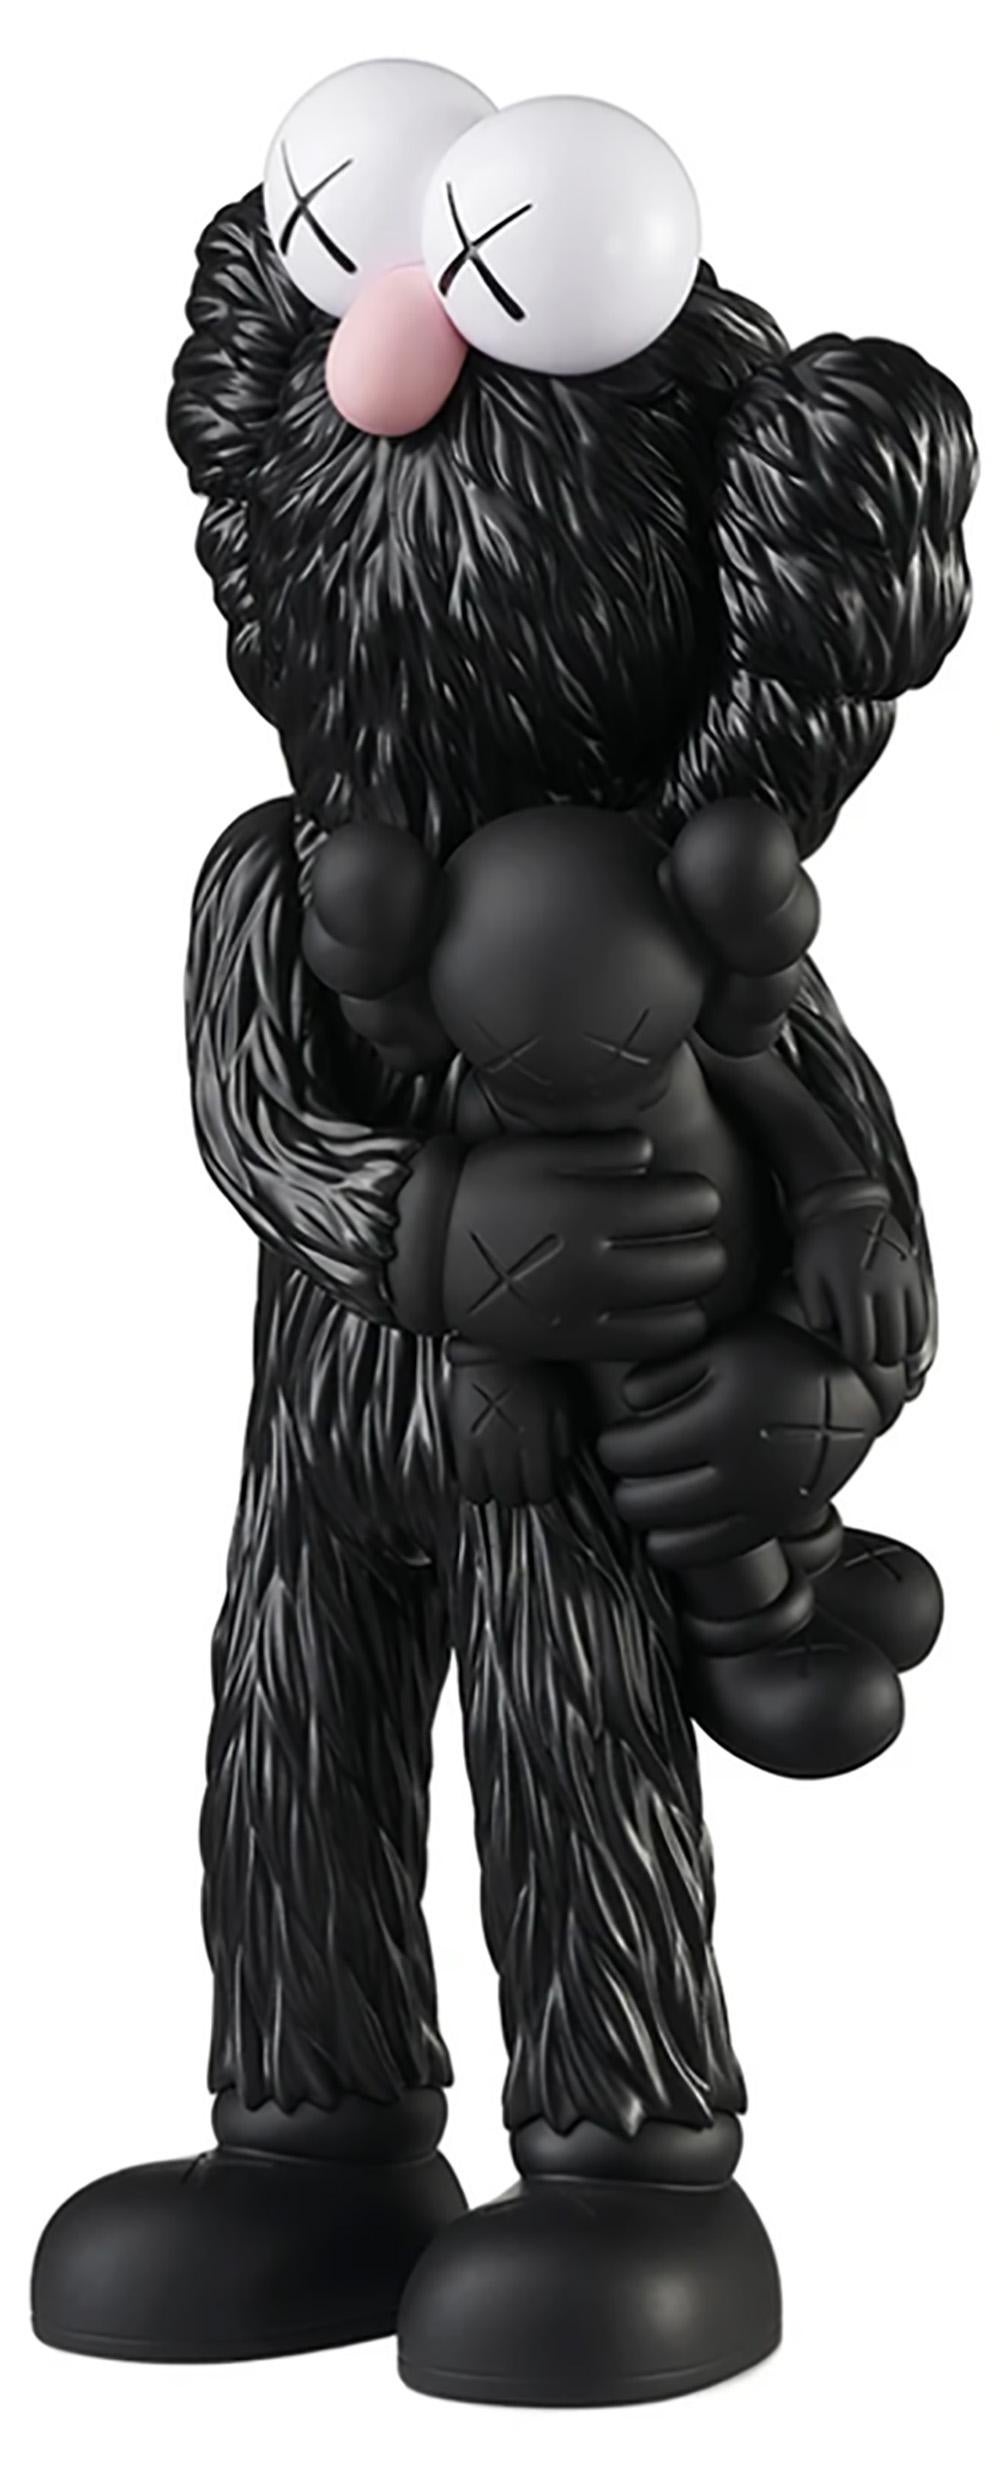 KAWS TAKE (Black) new & unopened in its original packaging. 
A standout KAWS figurative sculpture and variation of KAWS' large scale TAKE sculpture - a key highlight of the exhibition, 'KAWS BLACKOUT’ at Skarstedt Gallery London in 2019 - the first